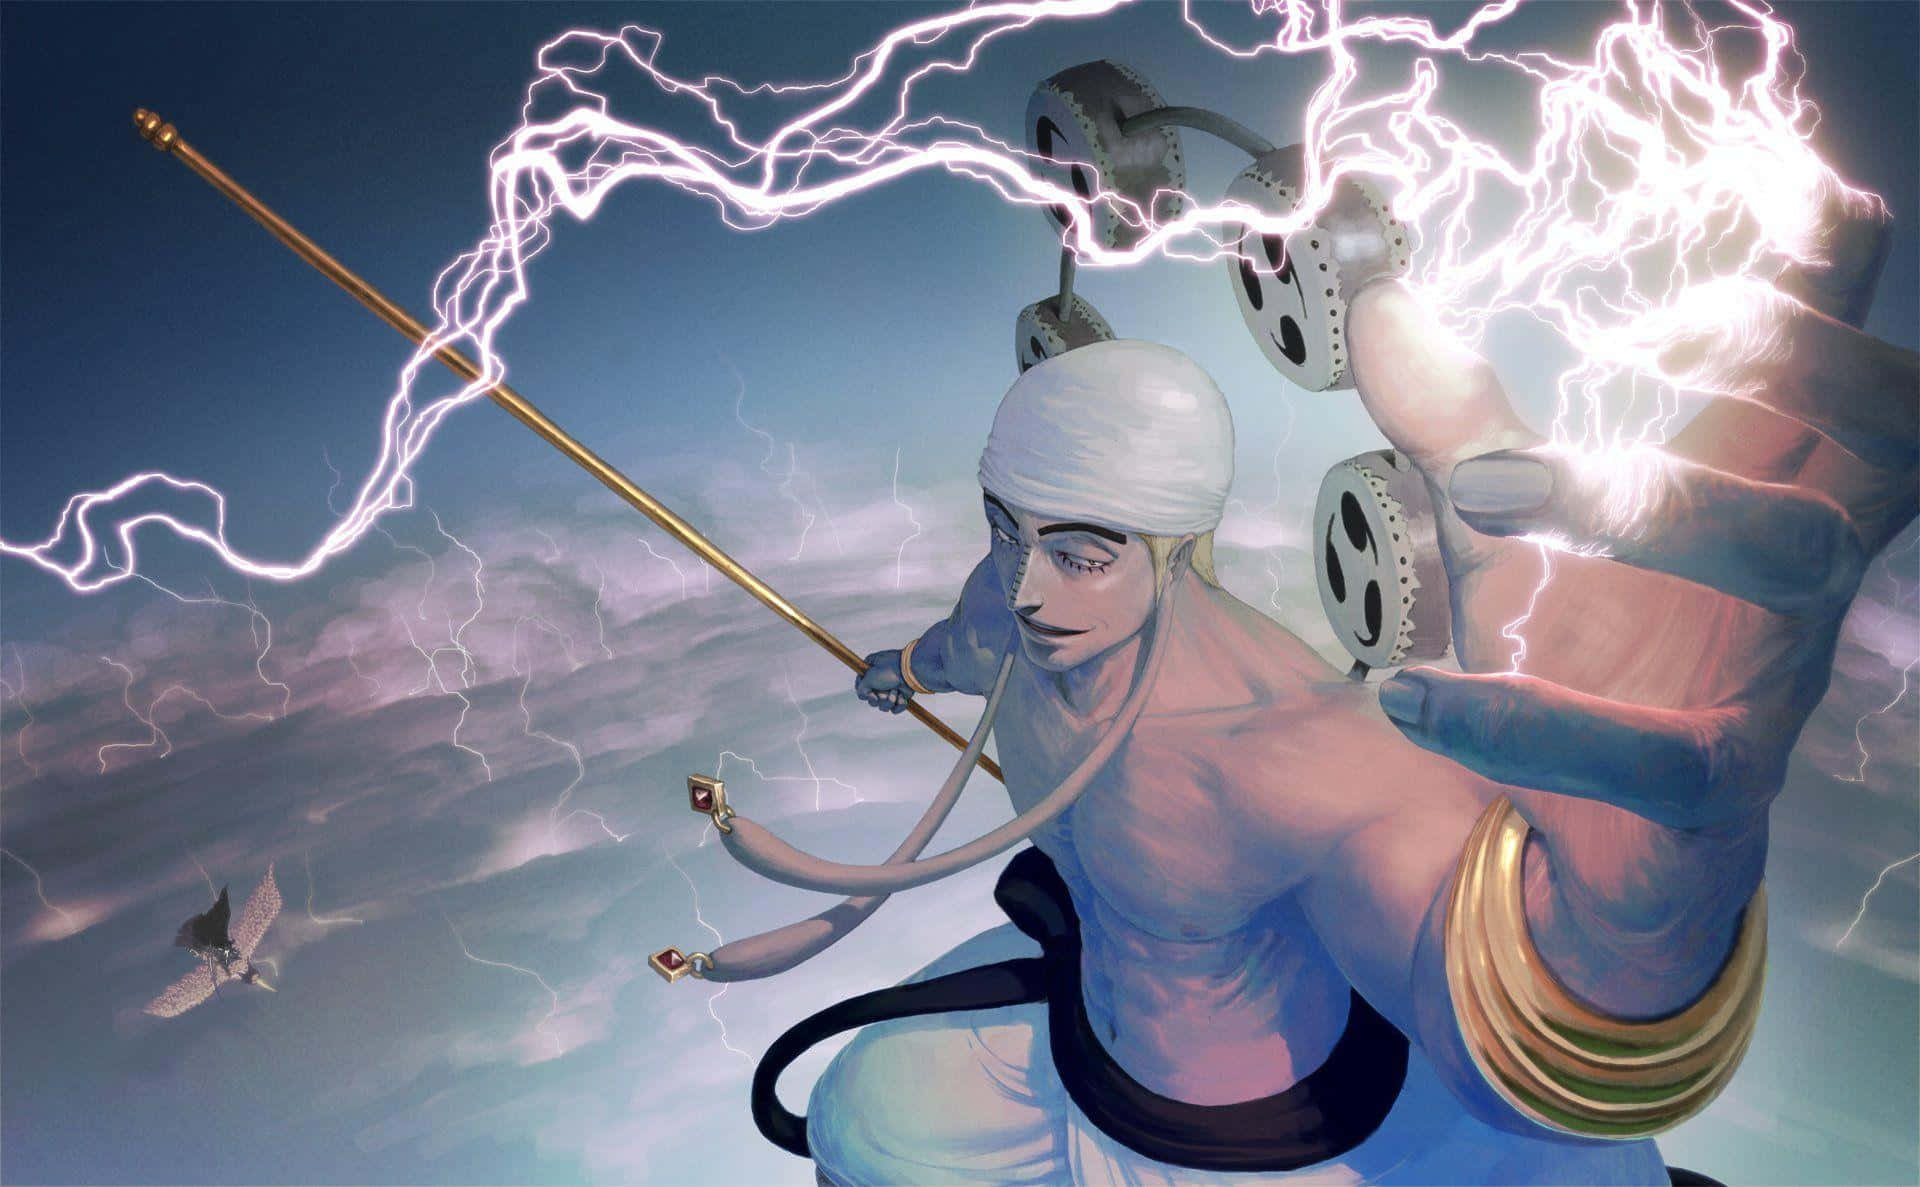 Enel, the god-like ruler of Skypiea, strikes a menacing pose in One Piece Wallpaper